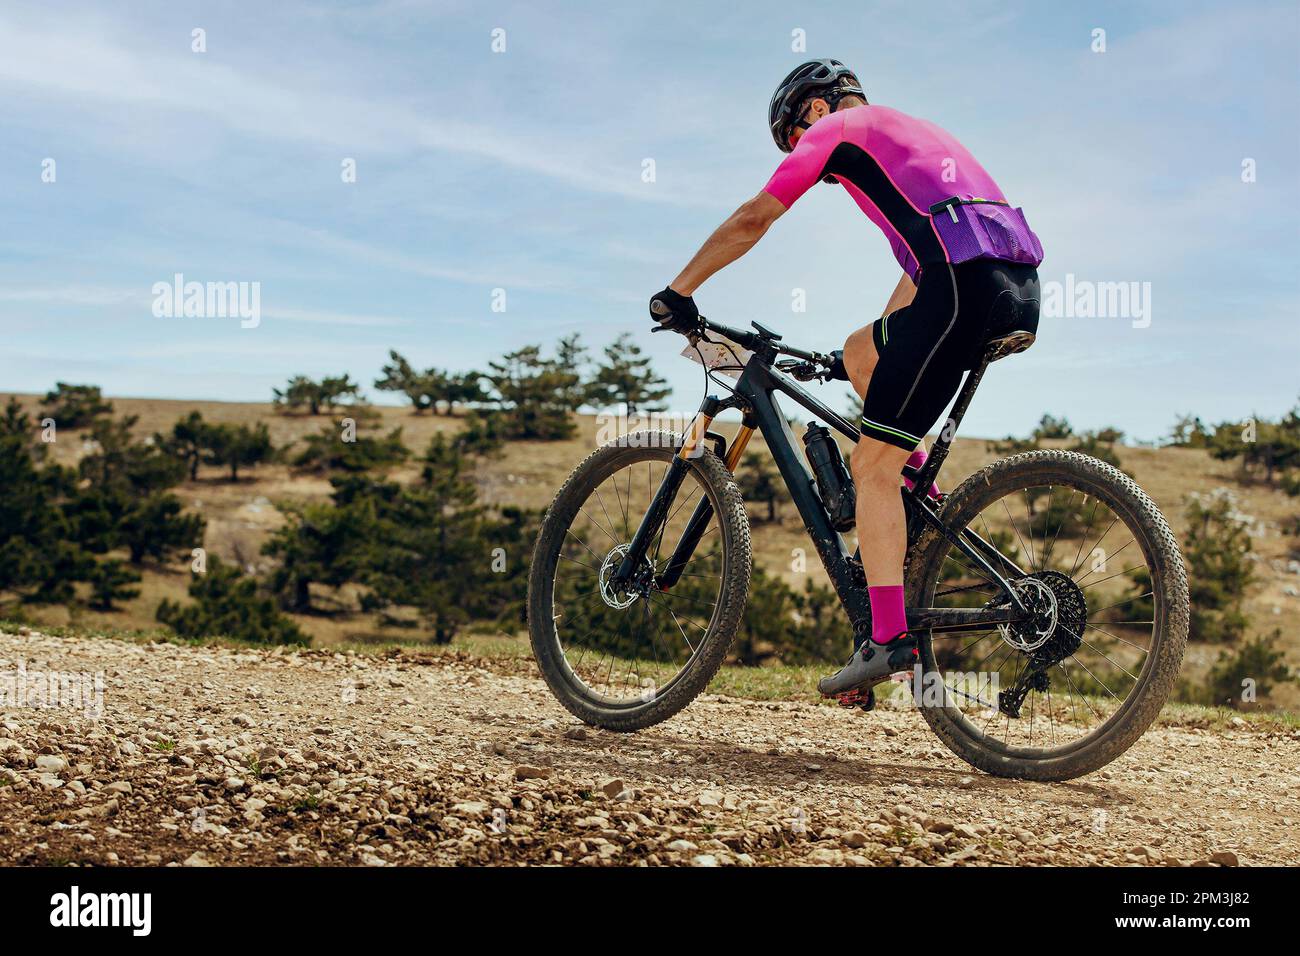 athlete mountainbiker biking uphill in cross-country cycling, outdoors summer race Stock Photo